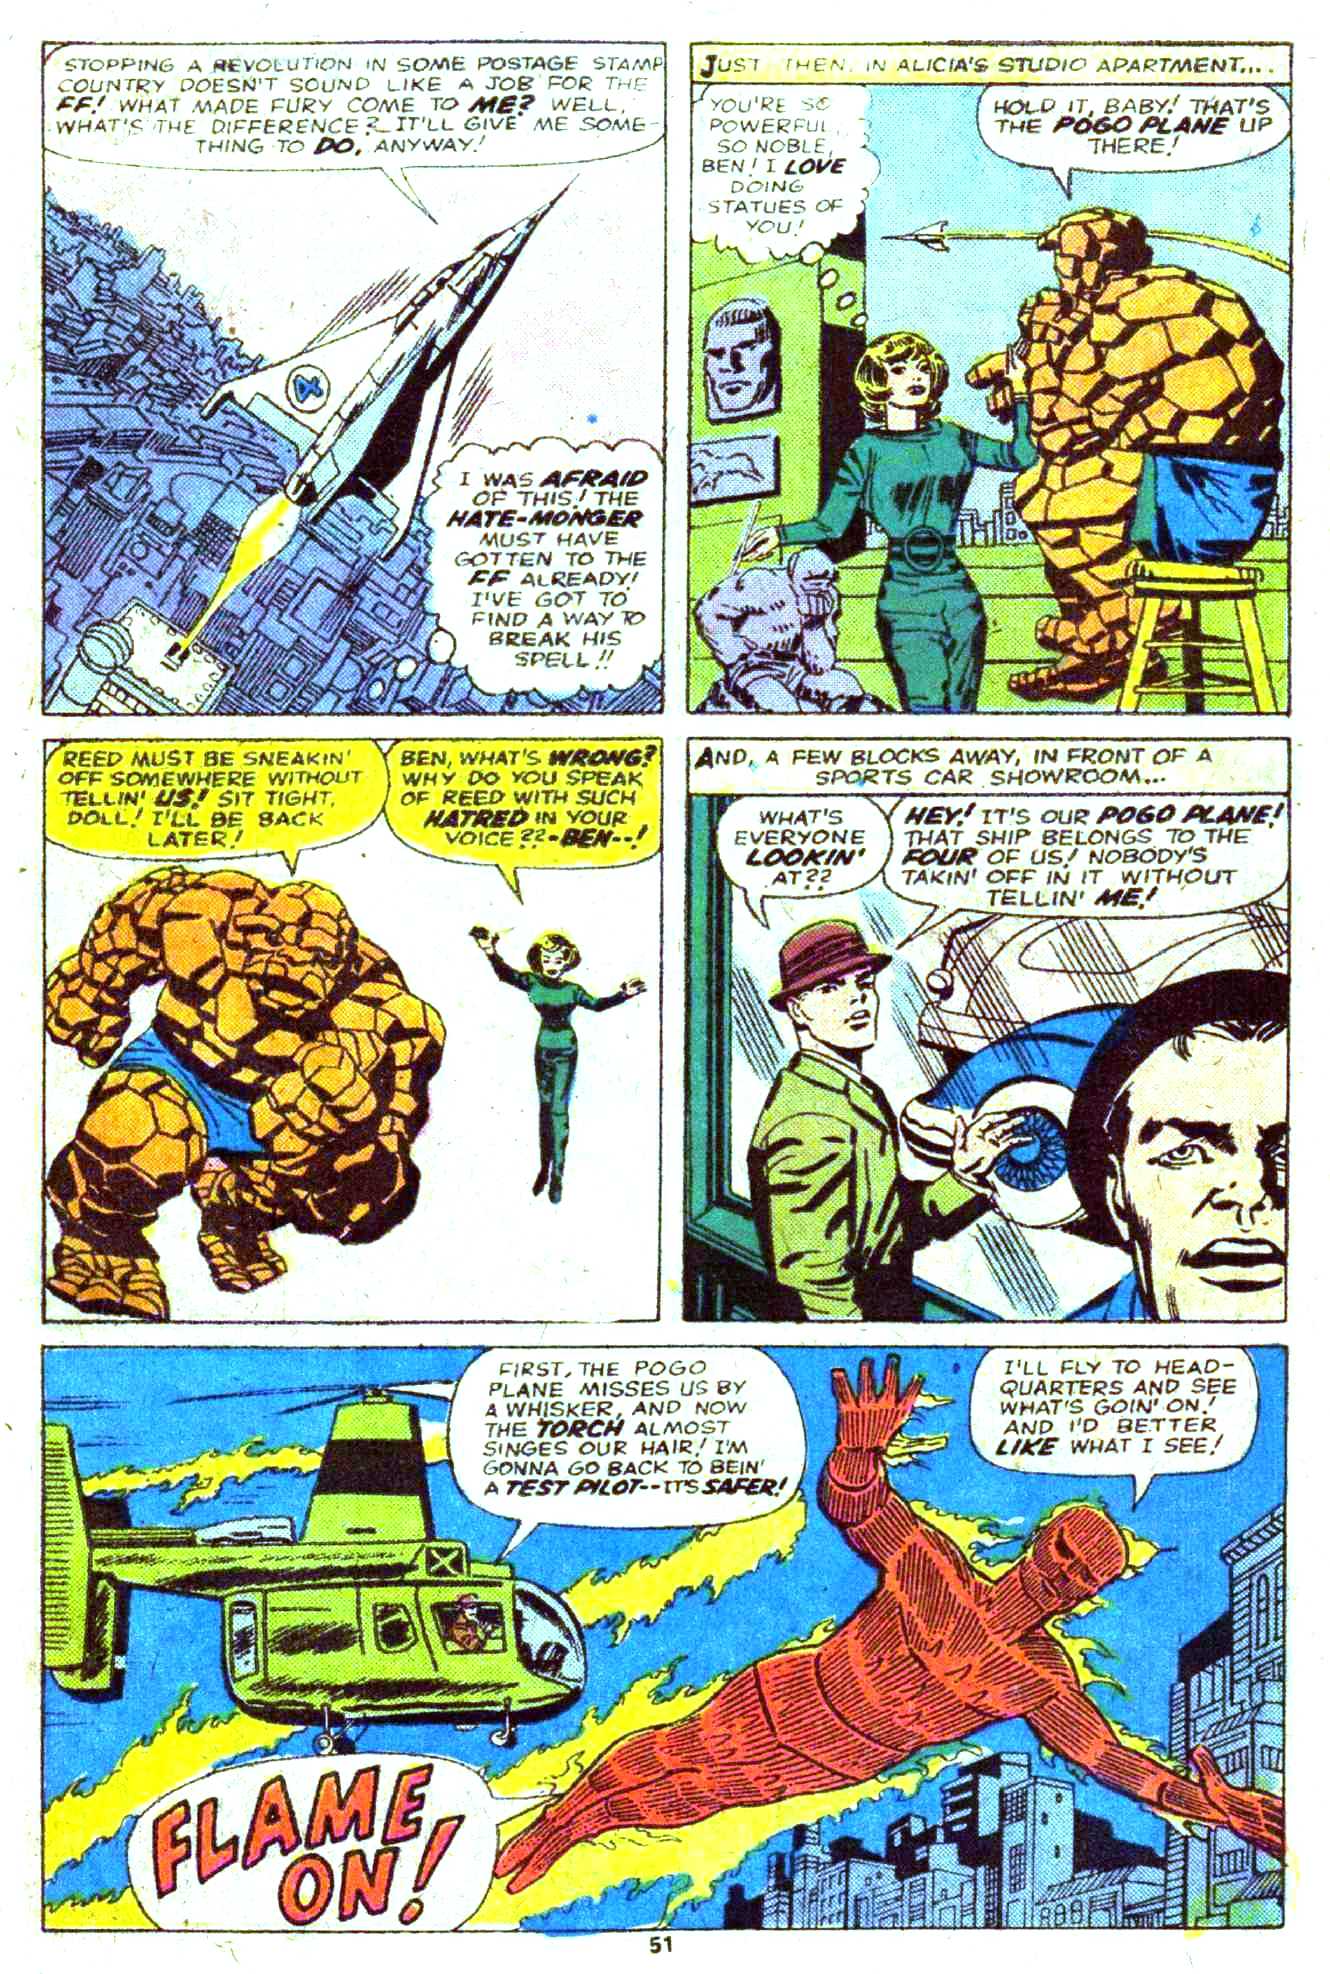 Read online Giant-Size Fantastic Four comic -  Issue #3 - 52